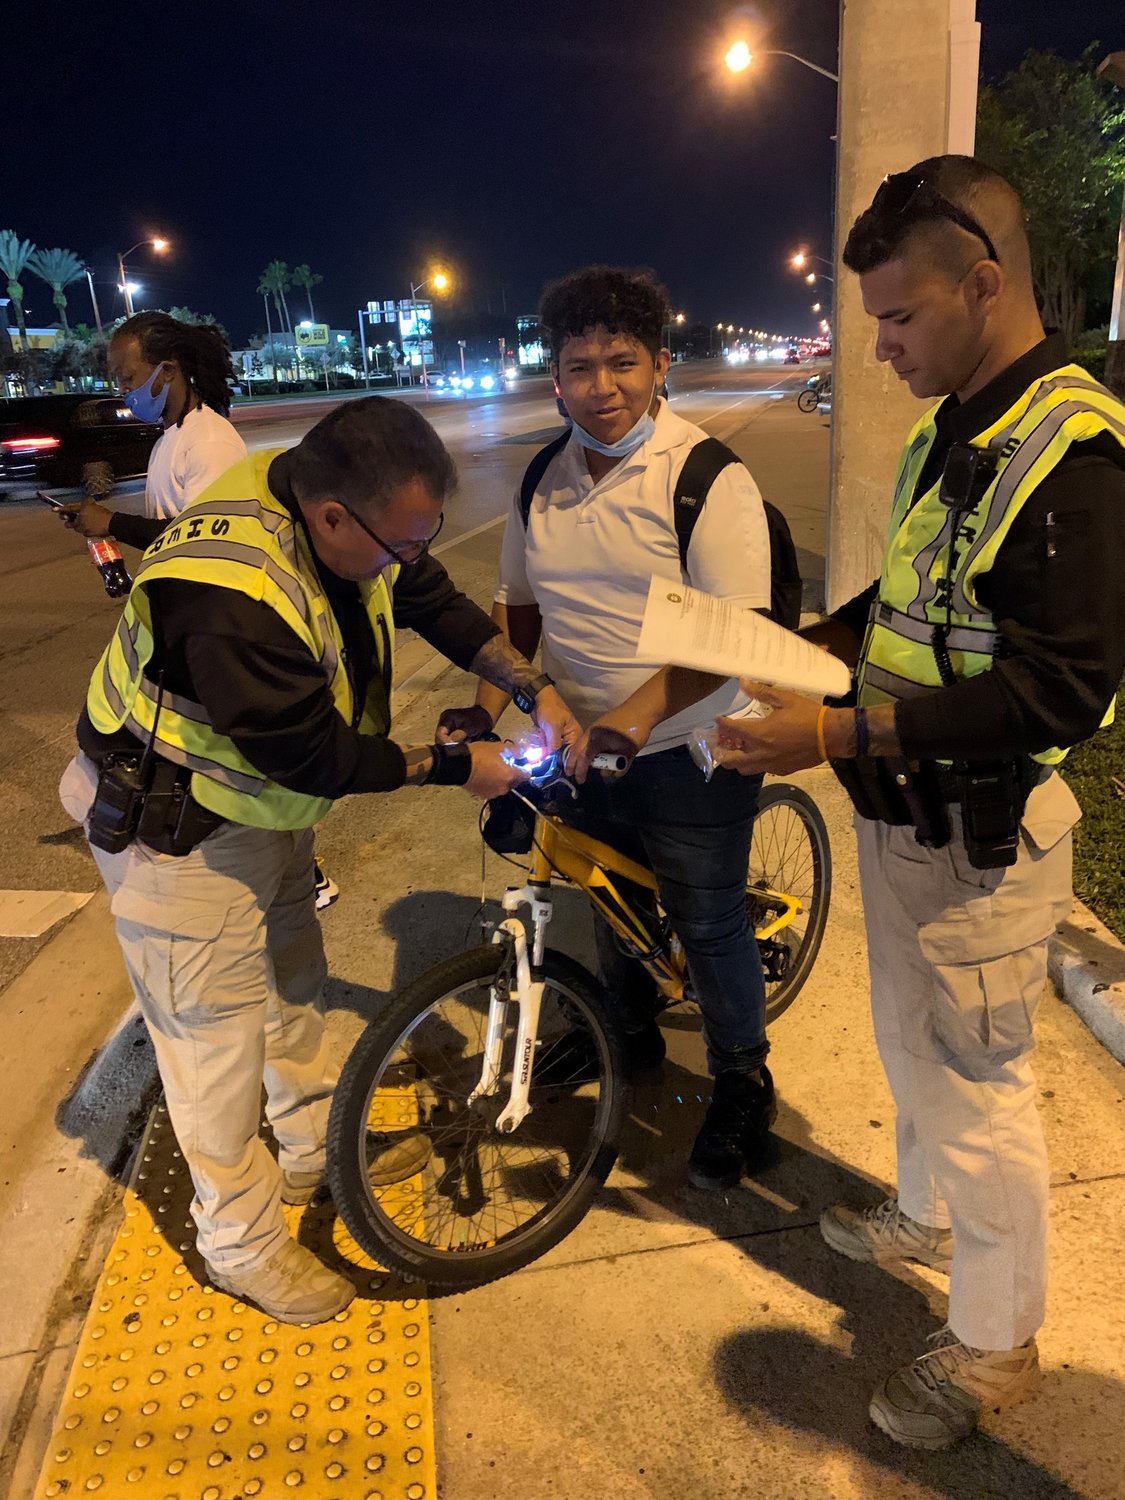 In an effort to protect the safety of those most vulnerable roadway users, the Palm Beach County Sheriff’s Office has been conducting High Visibility Enforcement (HVE) Details since November 8, 2021 at specific intersections throughout central Palm Beach County.